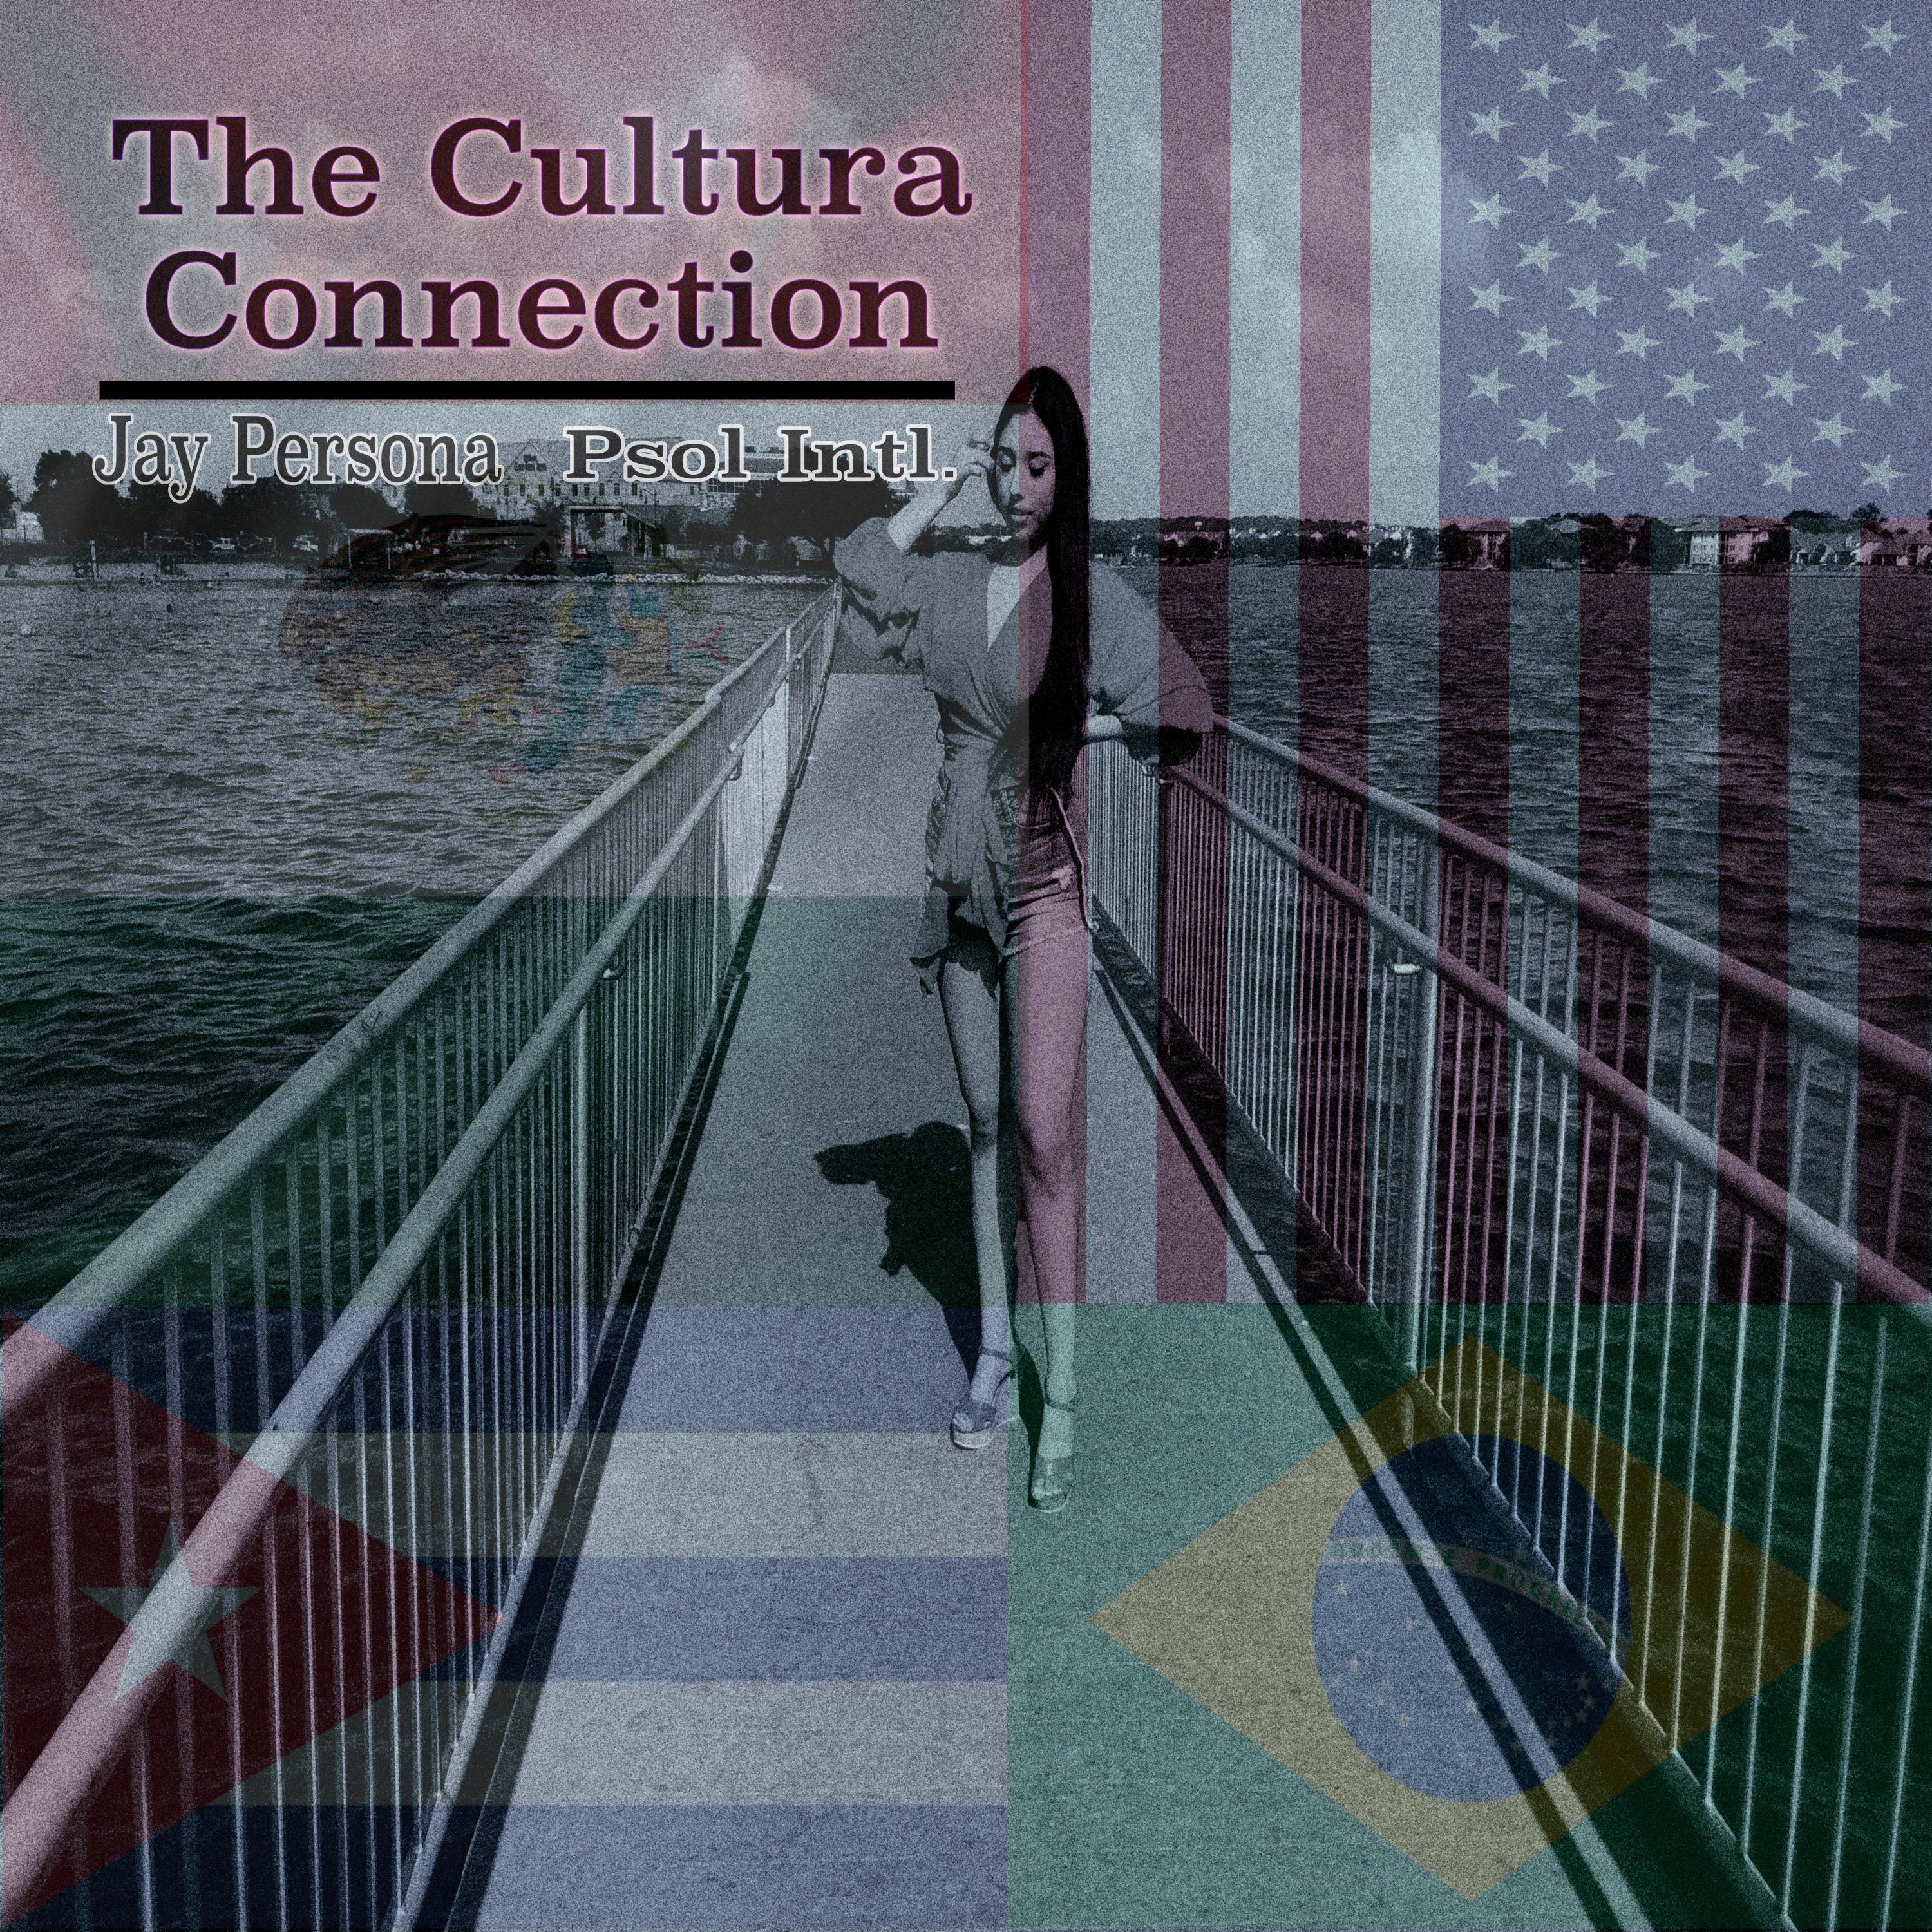 The Cultura Connection